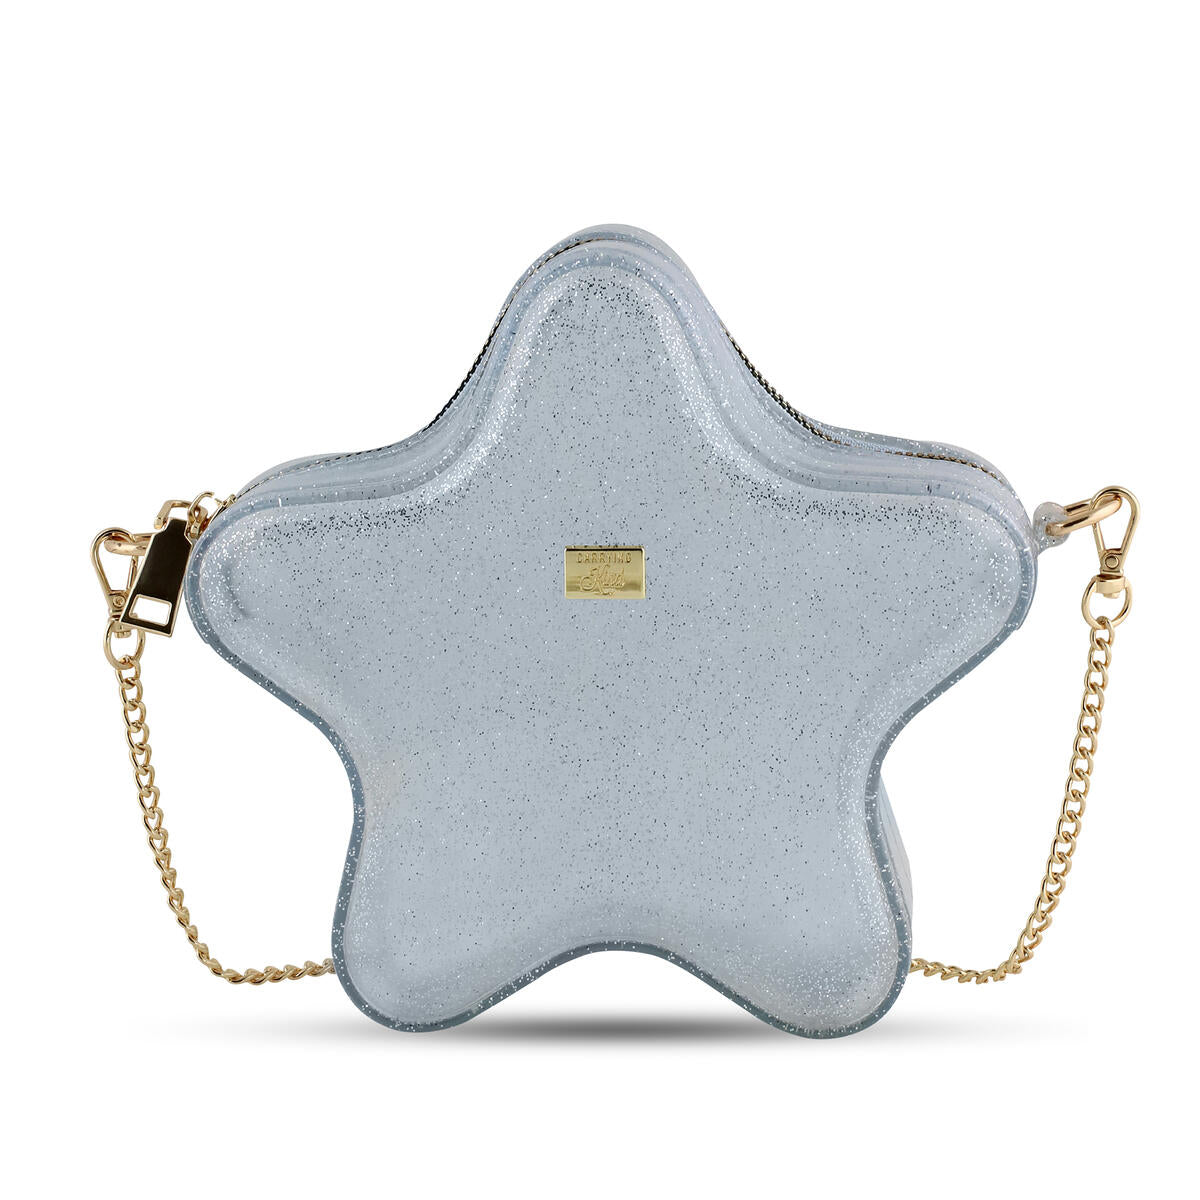 Taylor Silver Star Jelly Bag | Carrying Kind